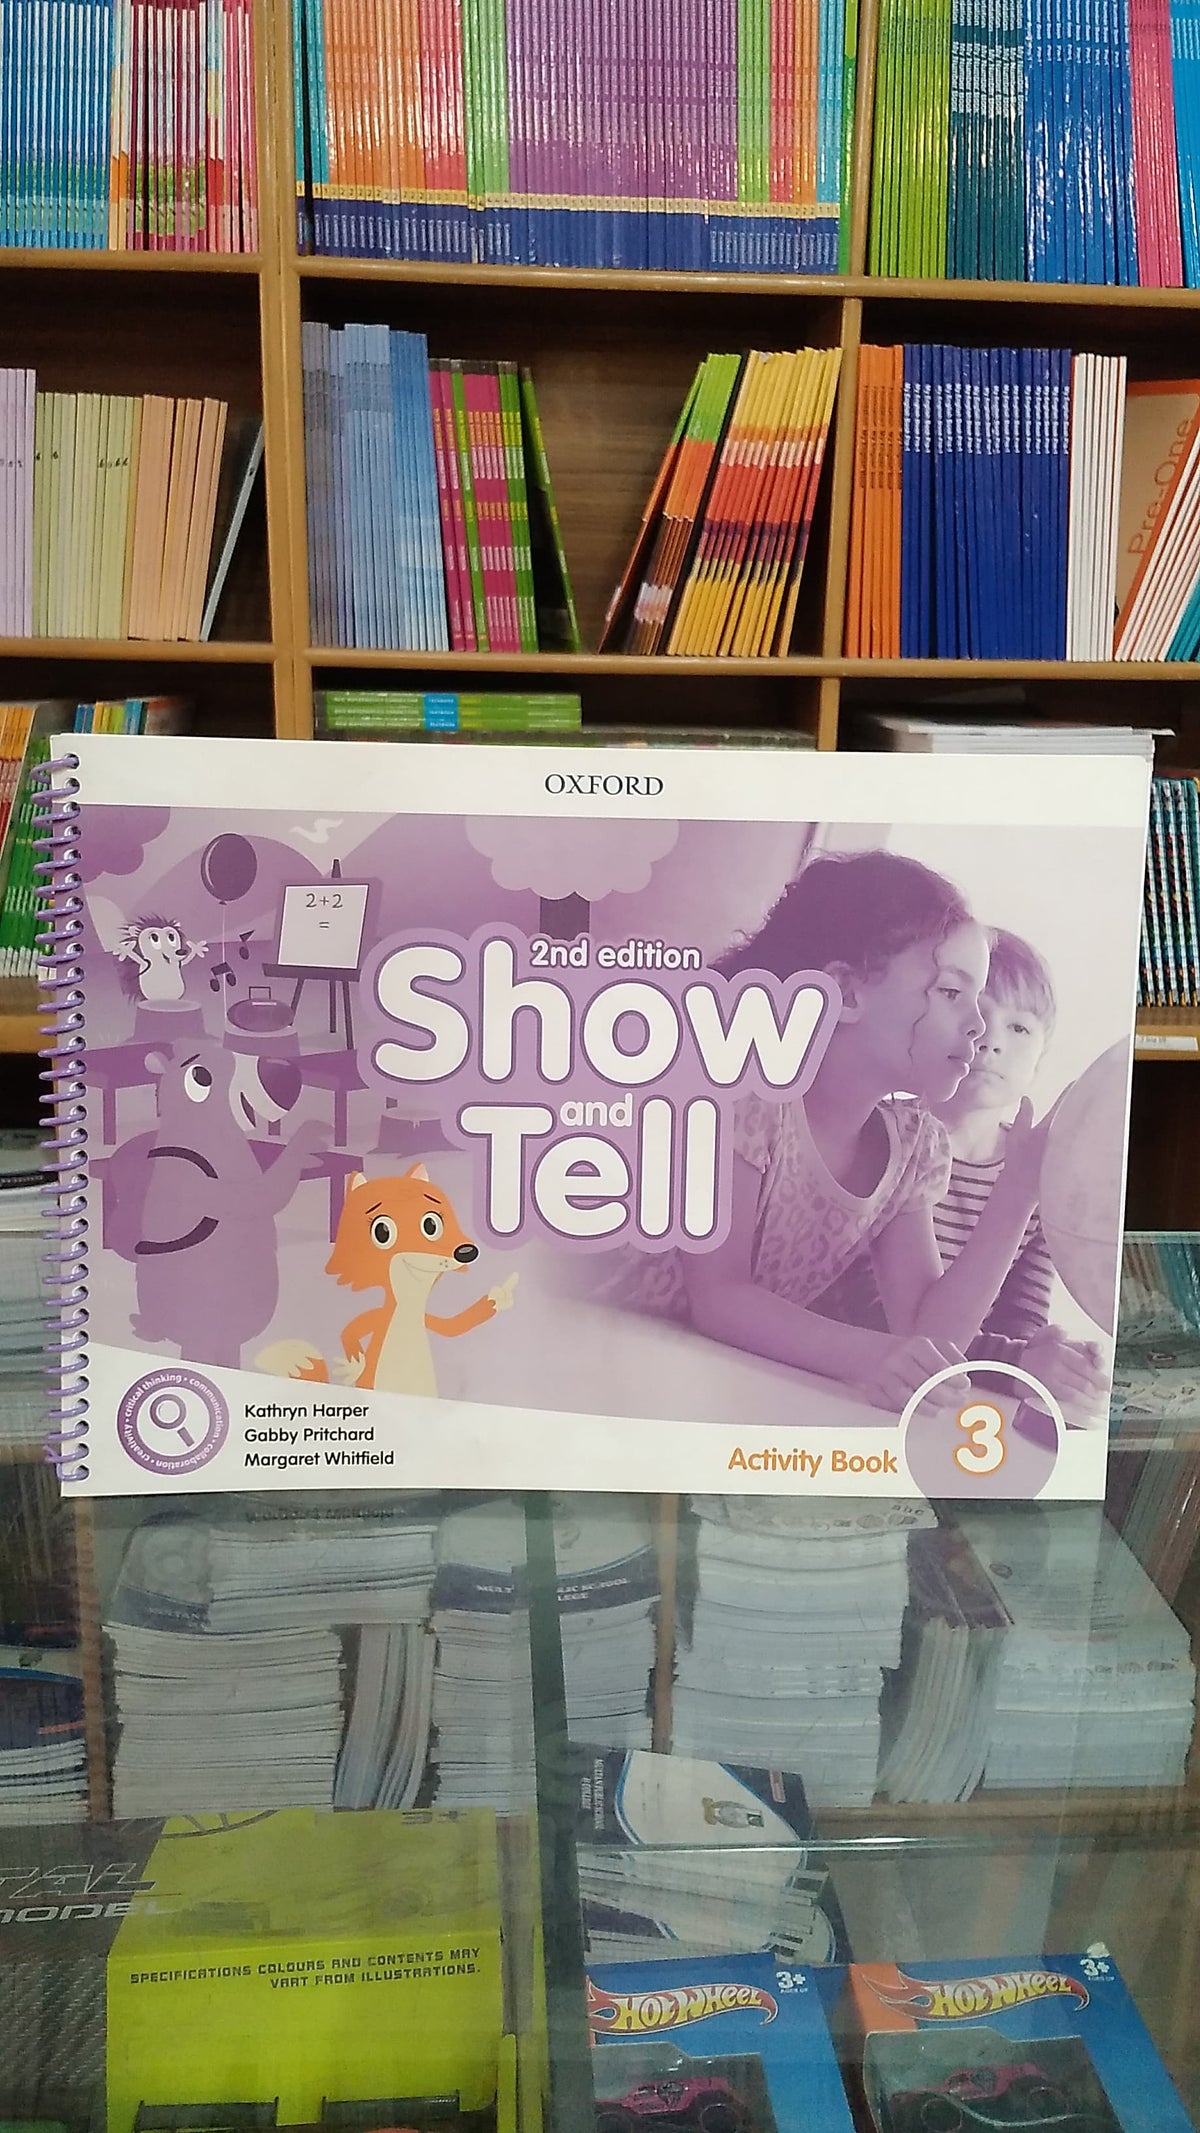 Oxford Show and Tell Activity Book 3